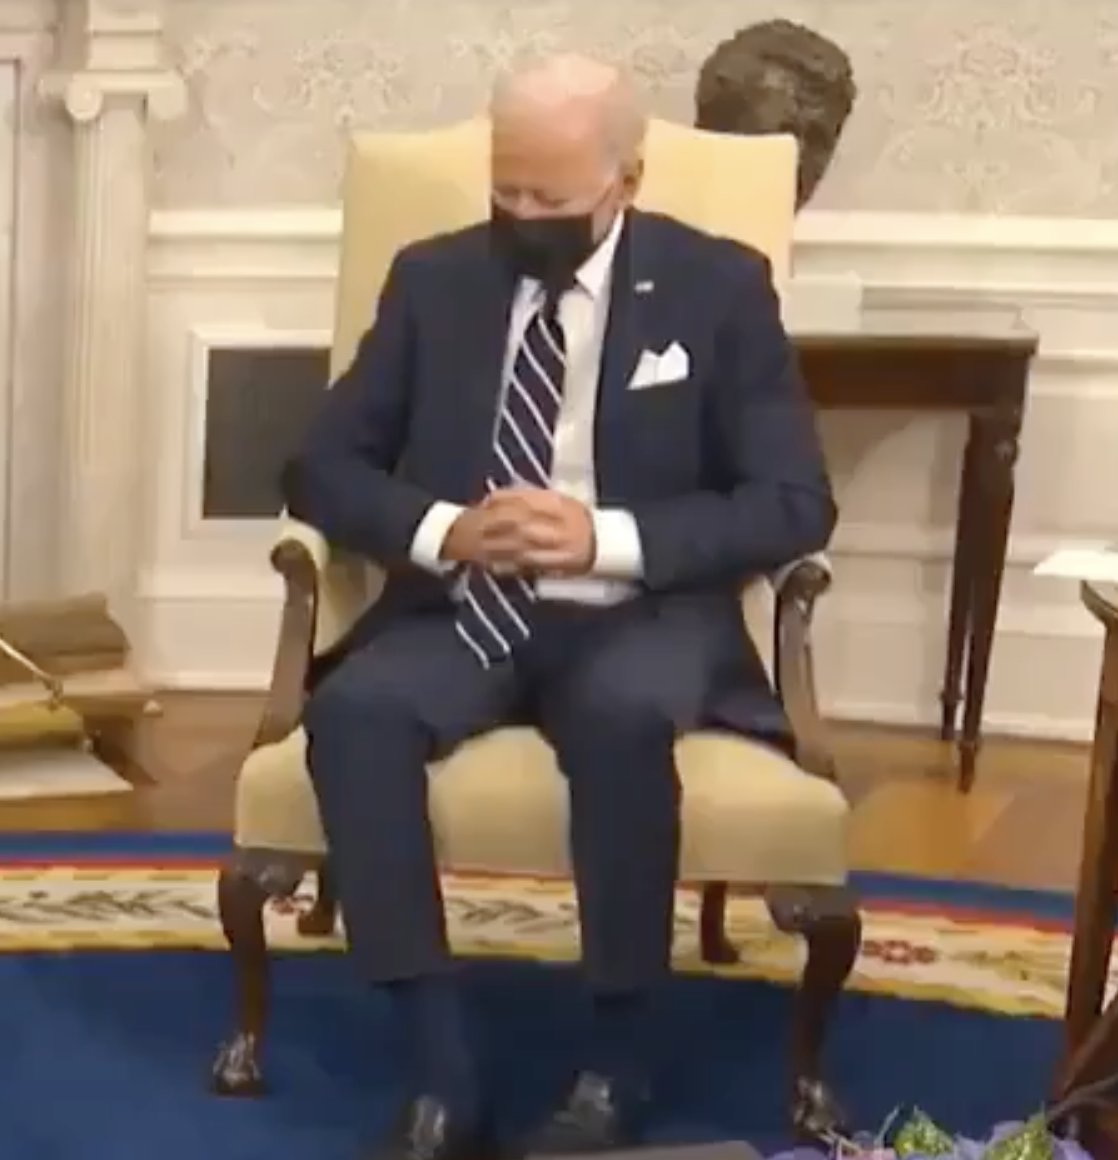 Biden sleeps during meeting to show public support for Israel What a show of strength!